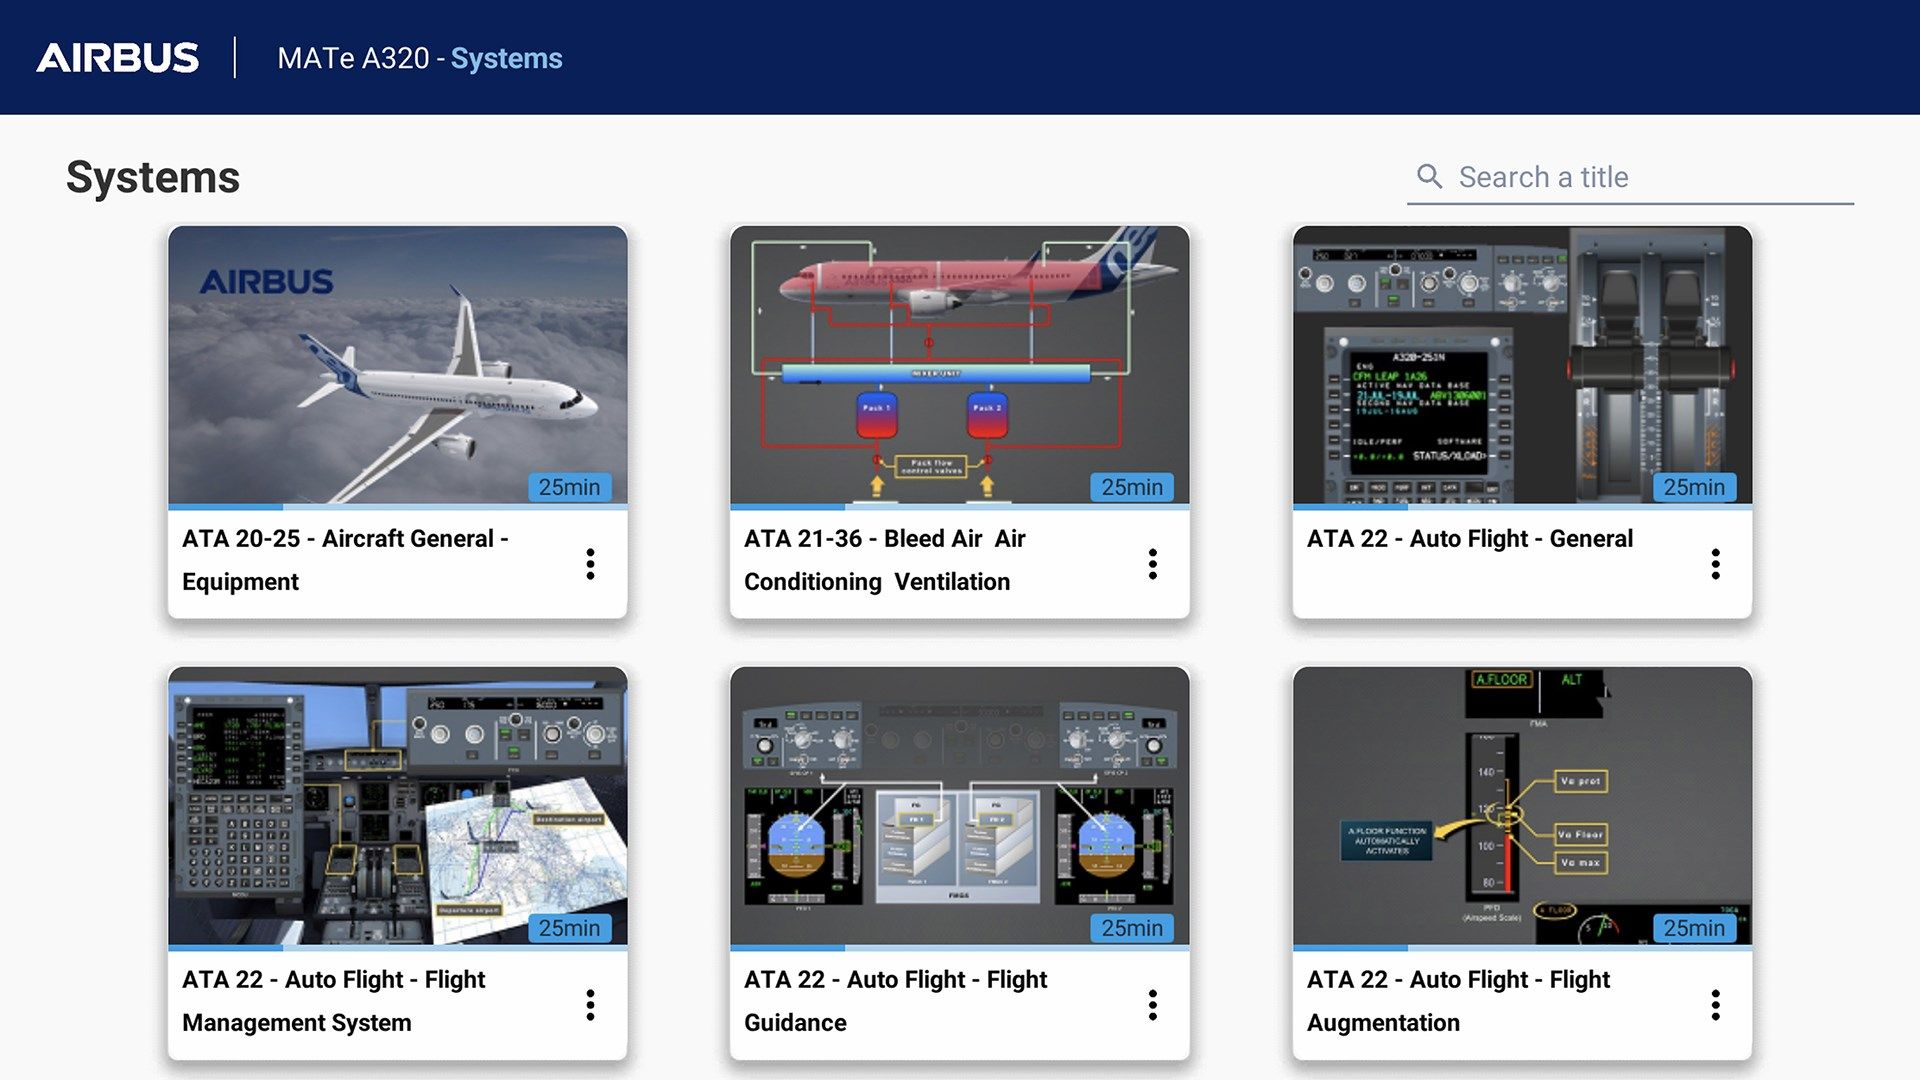 A320 MATe Systems